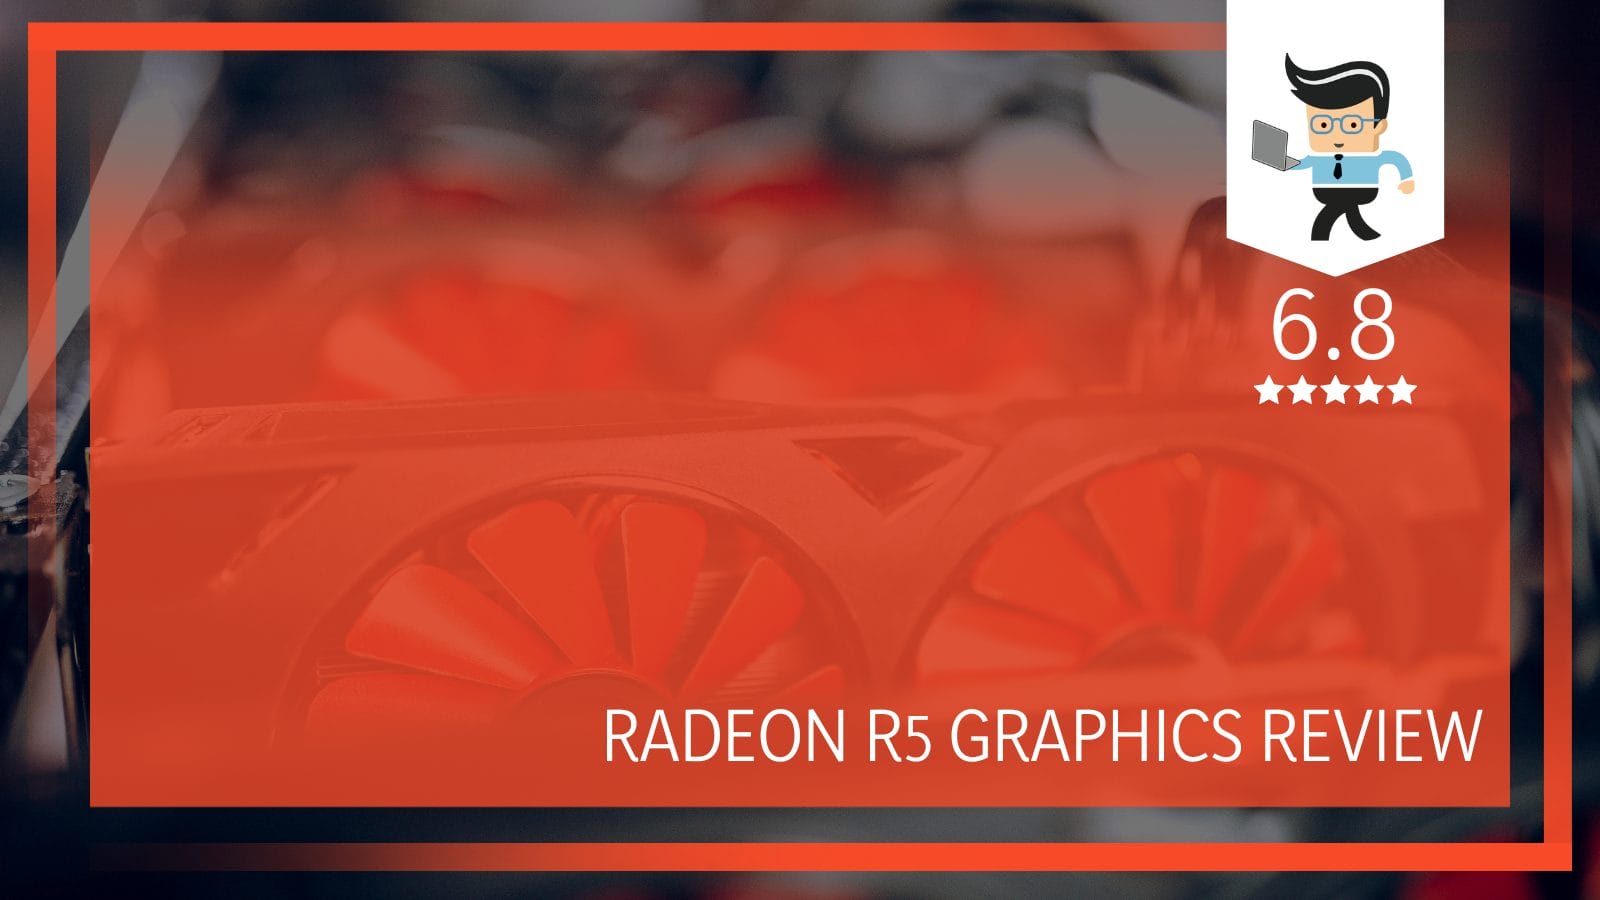 opengl 3.3 supported graphics cards radeon r5